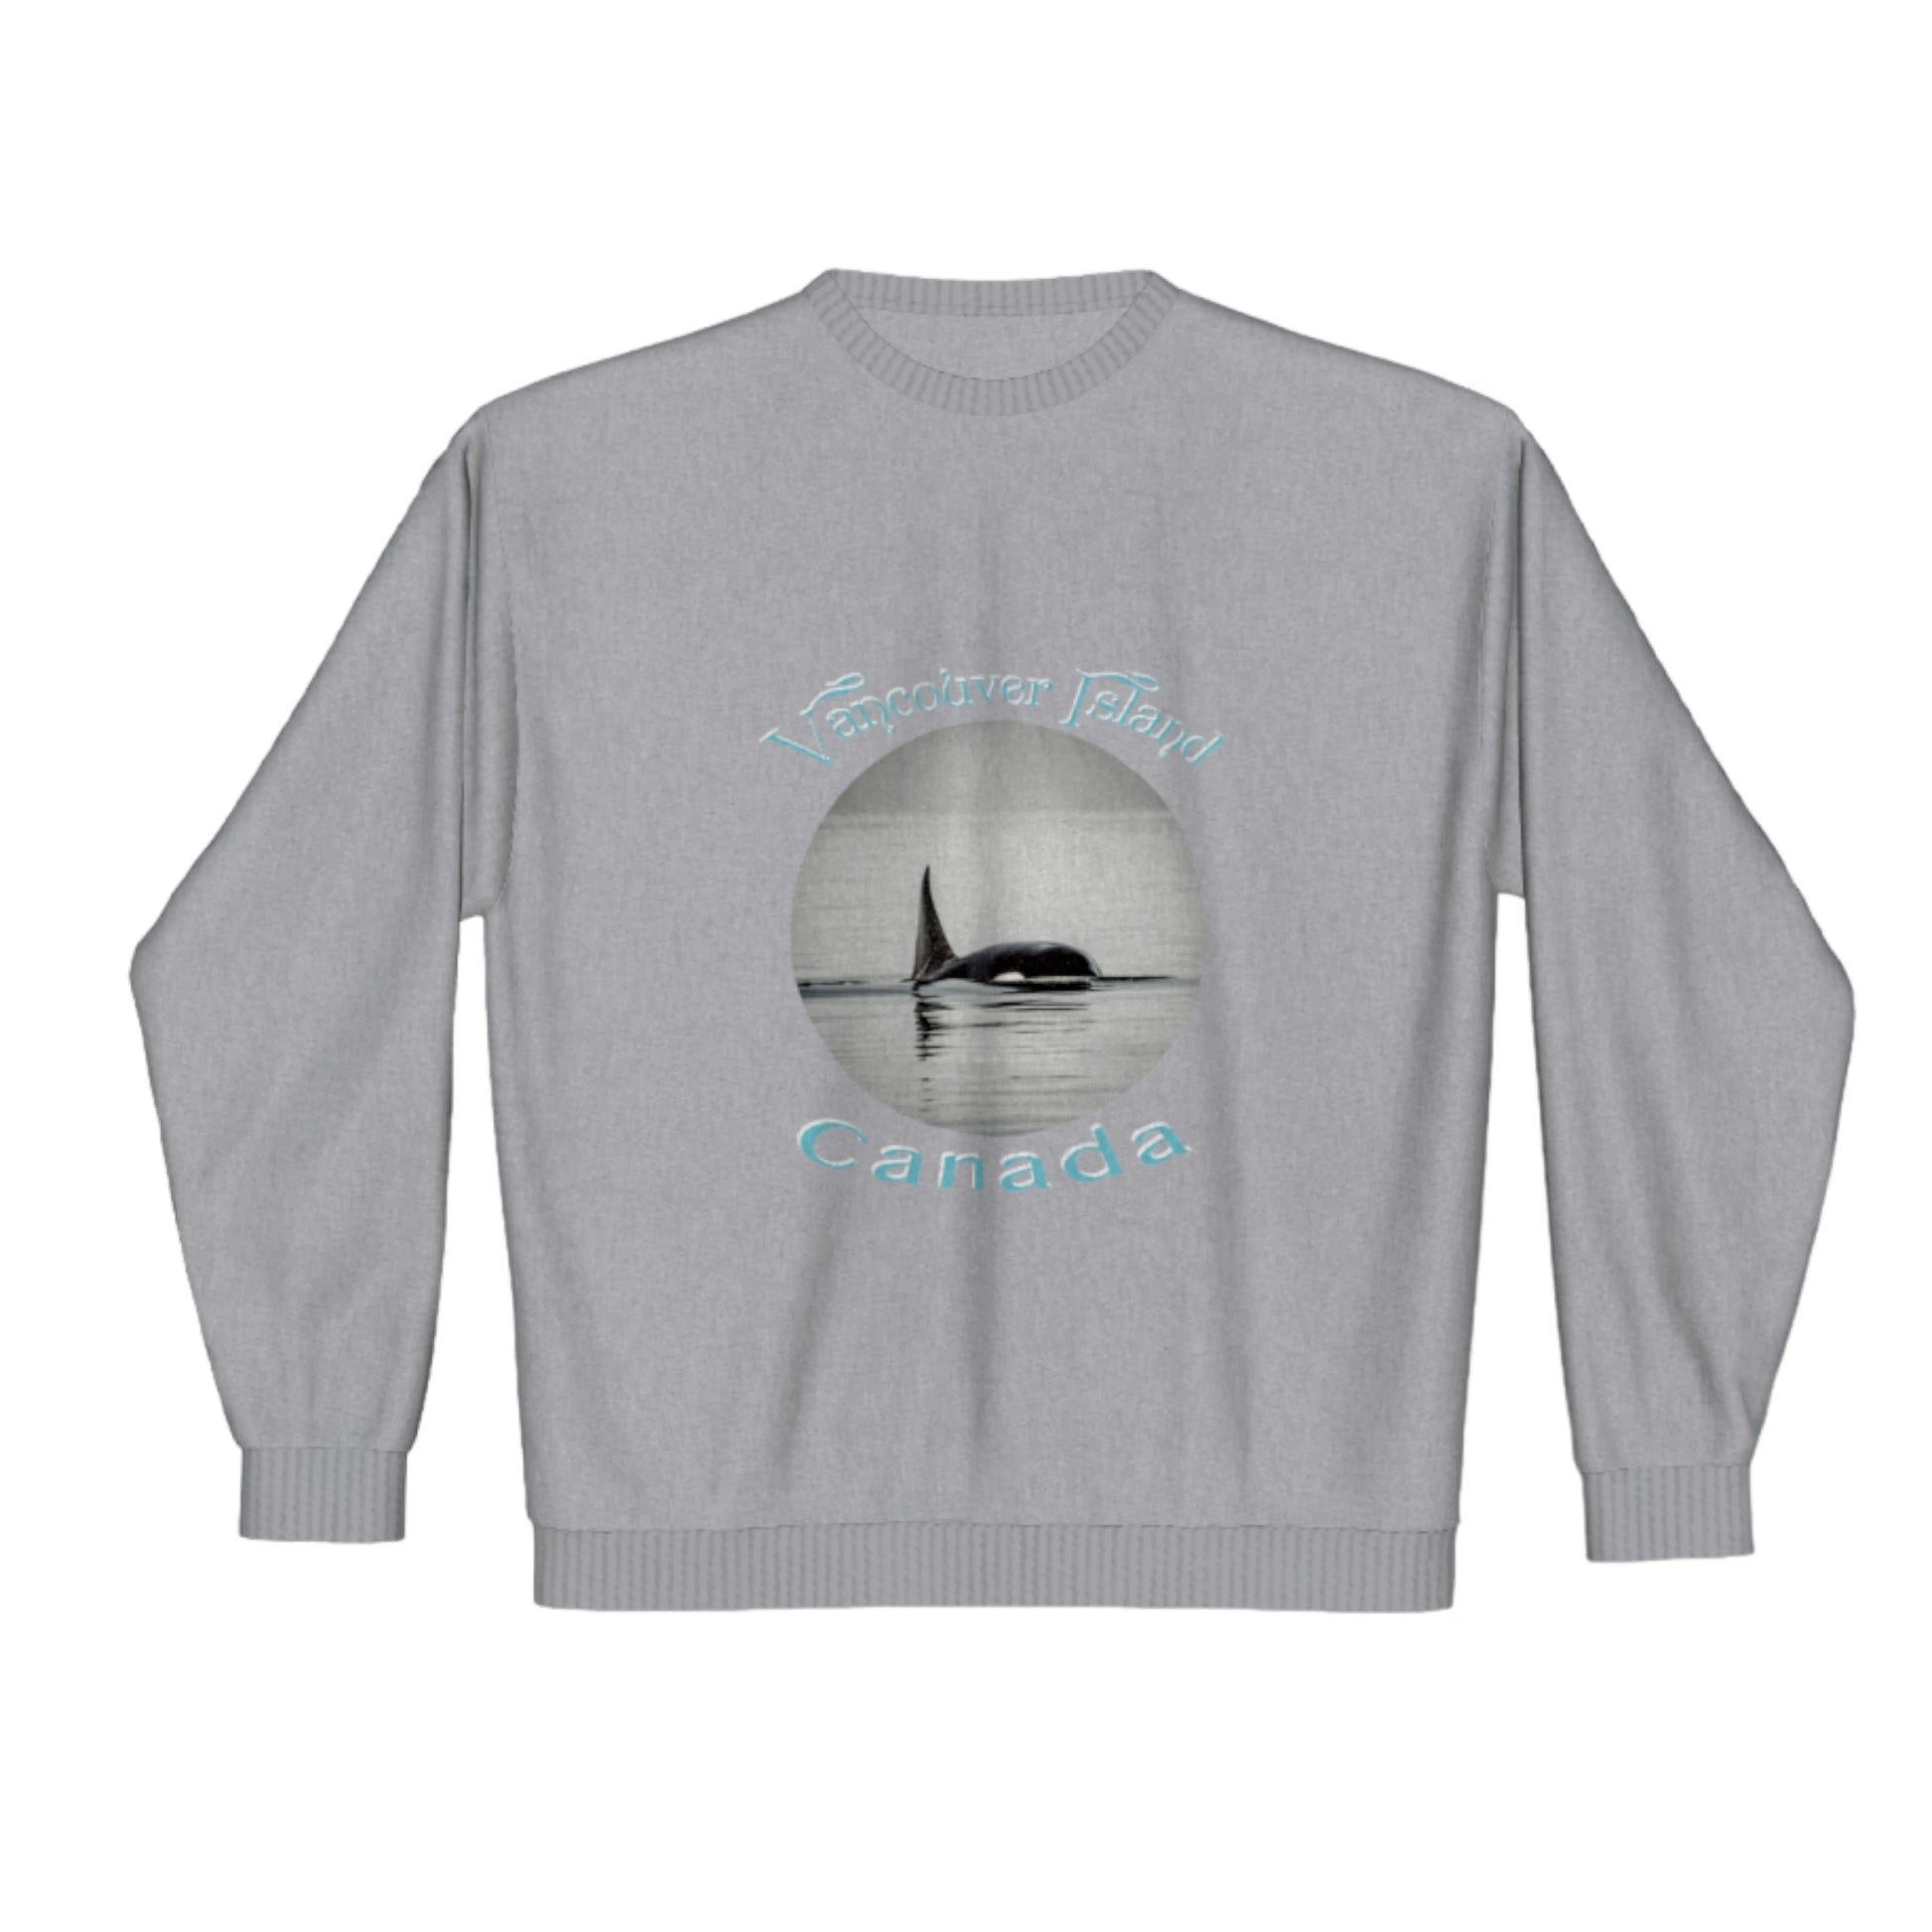 Orca Spray Vancouver Island Canada Premium Crewneck Sweatshirt. The image is of an orca exhaling while in the johnstone strait on Vancouver Island.  